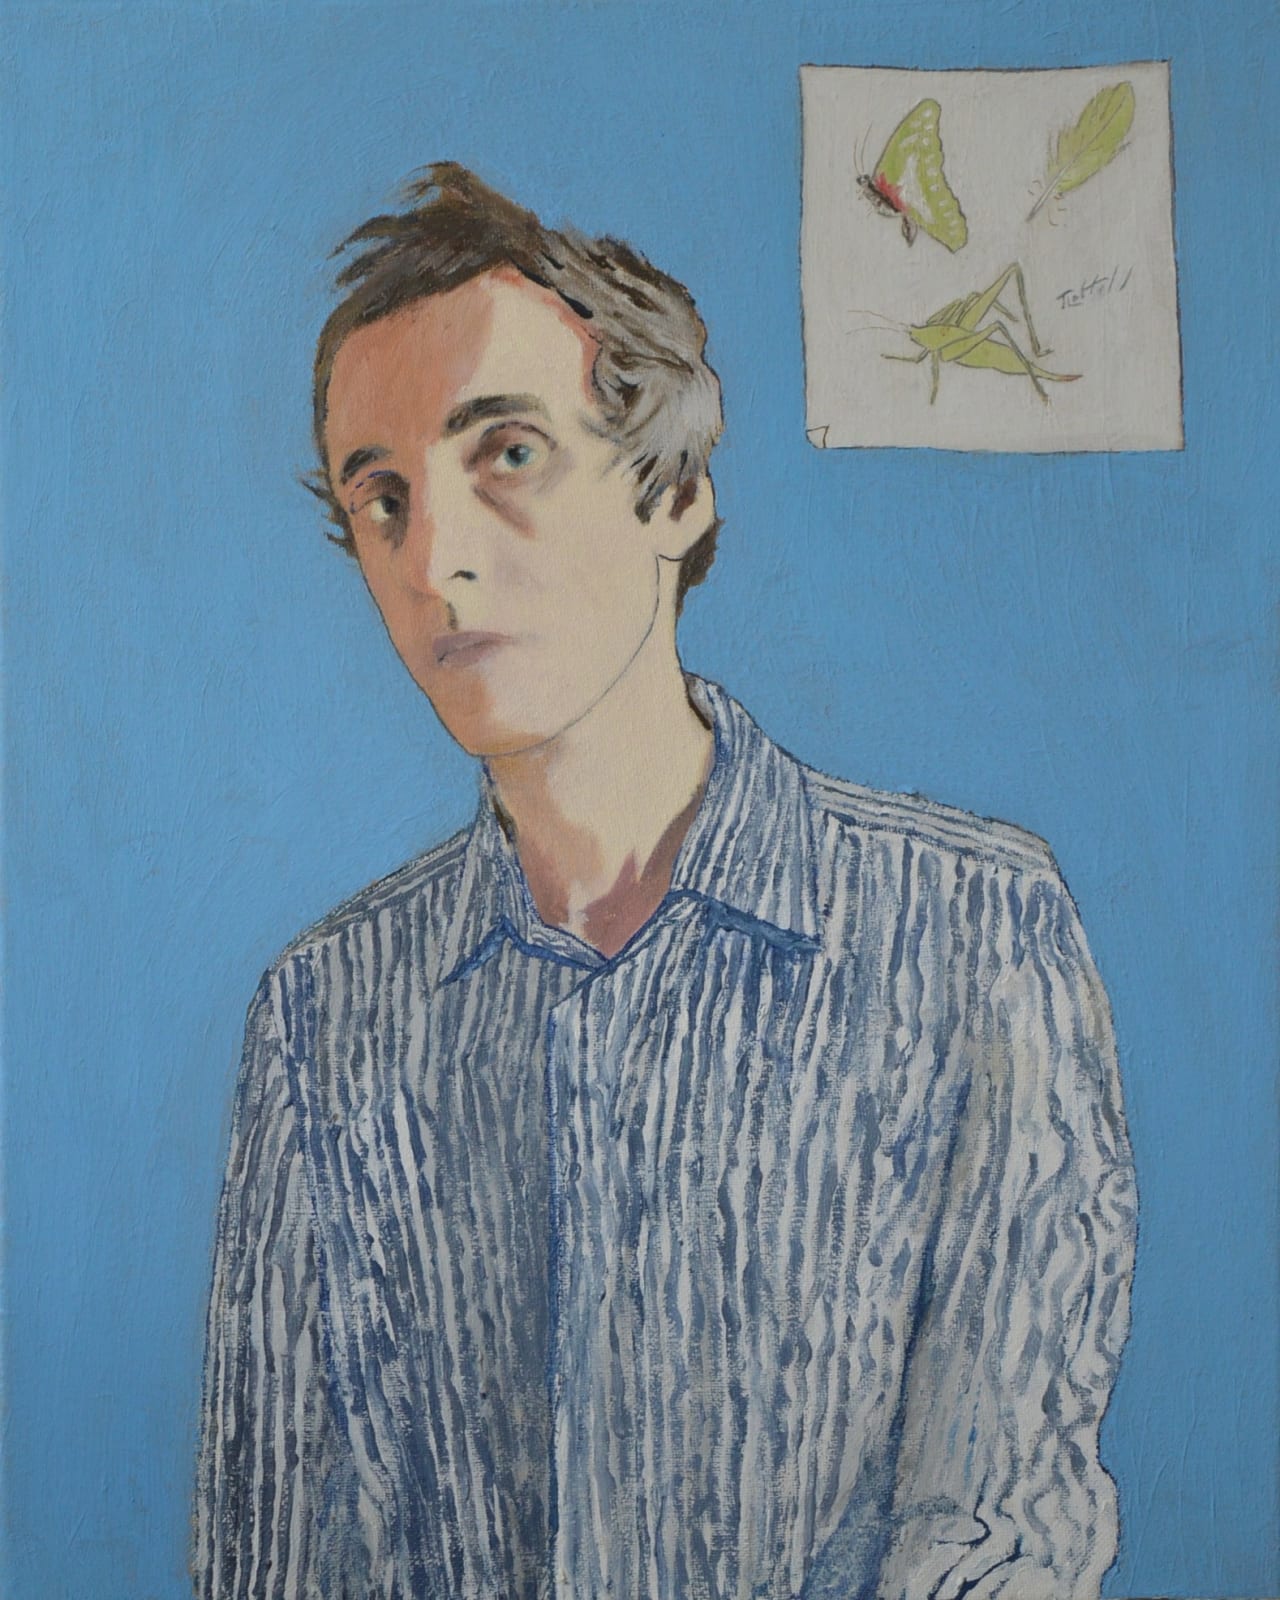 Tom Loffill, Self-Portrait With Striped Shirt and Illustrations, 2021